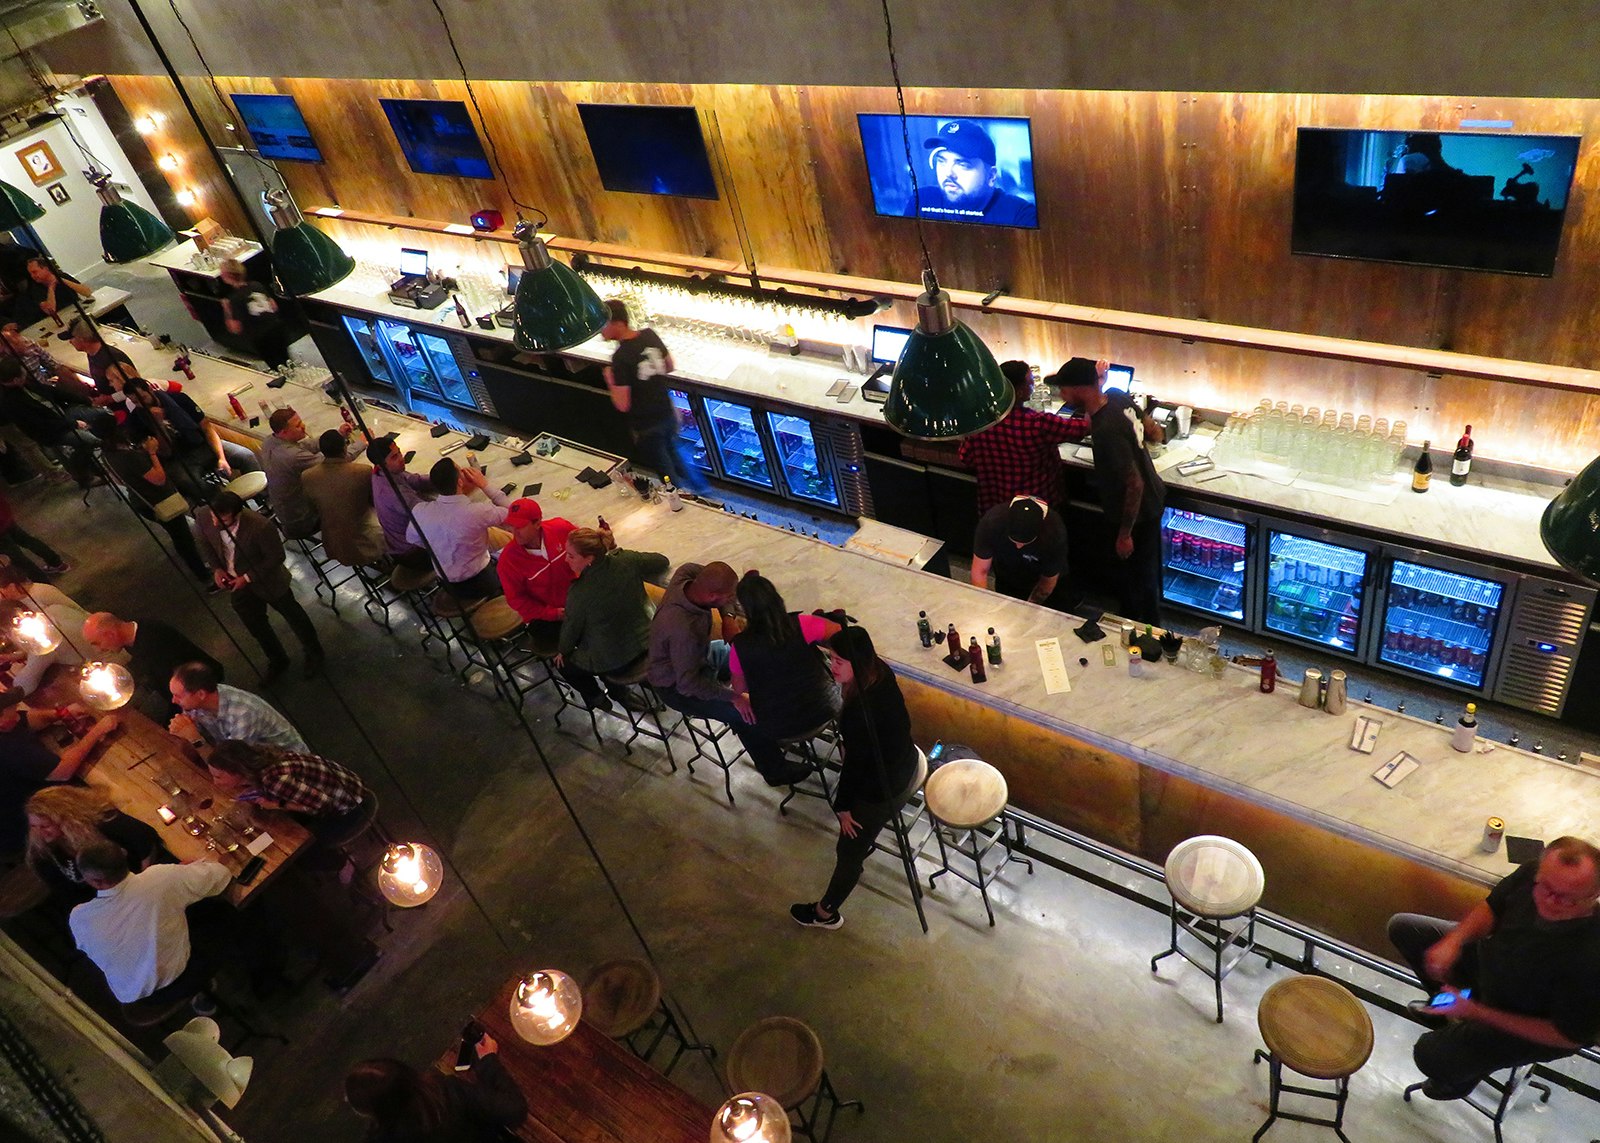 aerial shot of people sitting on barstools in a dimly lit, modern wood-paneled bar © Barbara Noe Kennedy / Lonely Planet